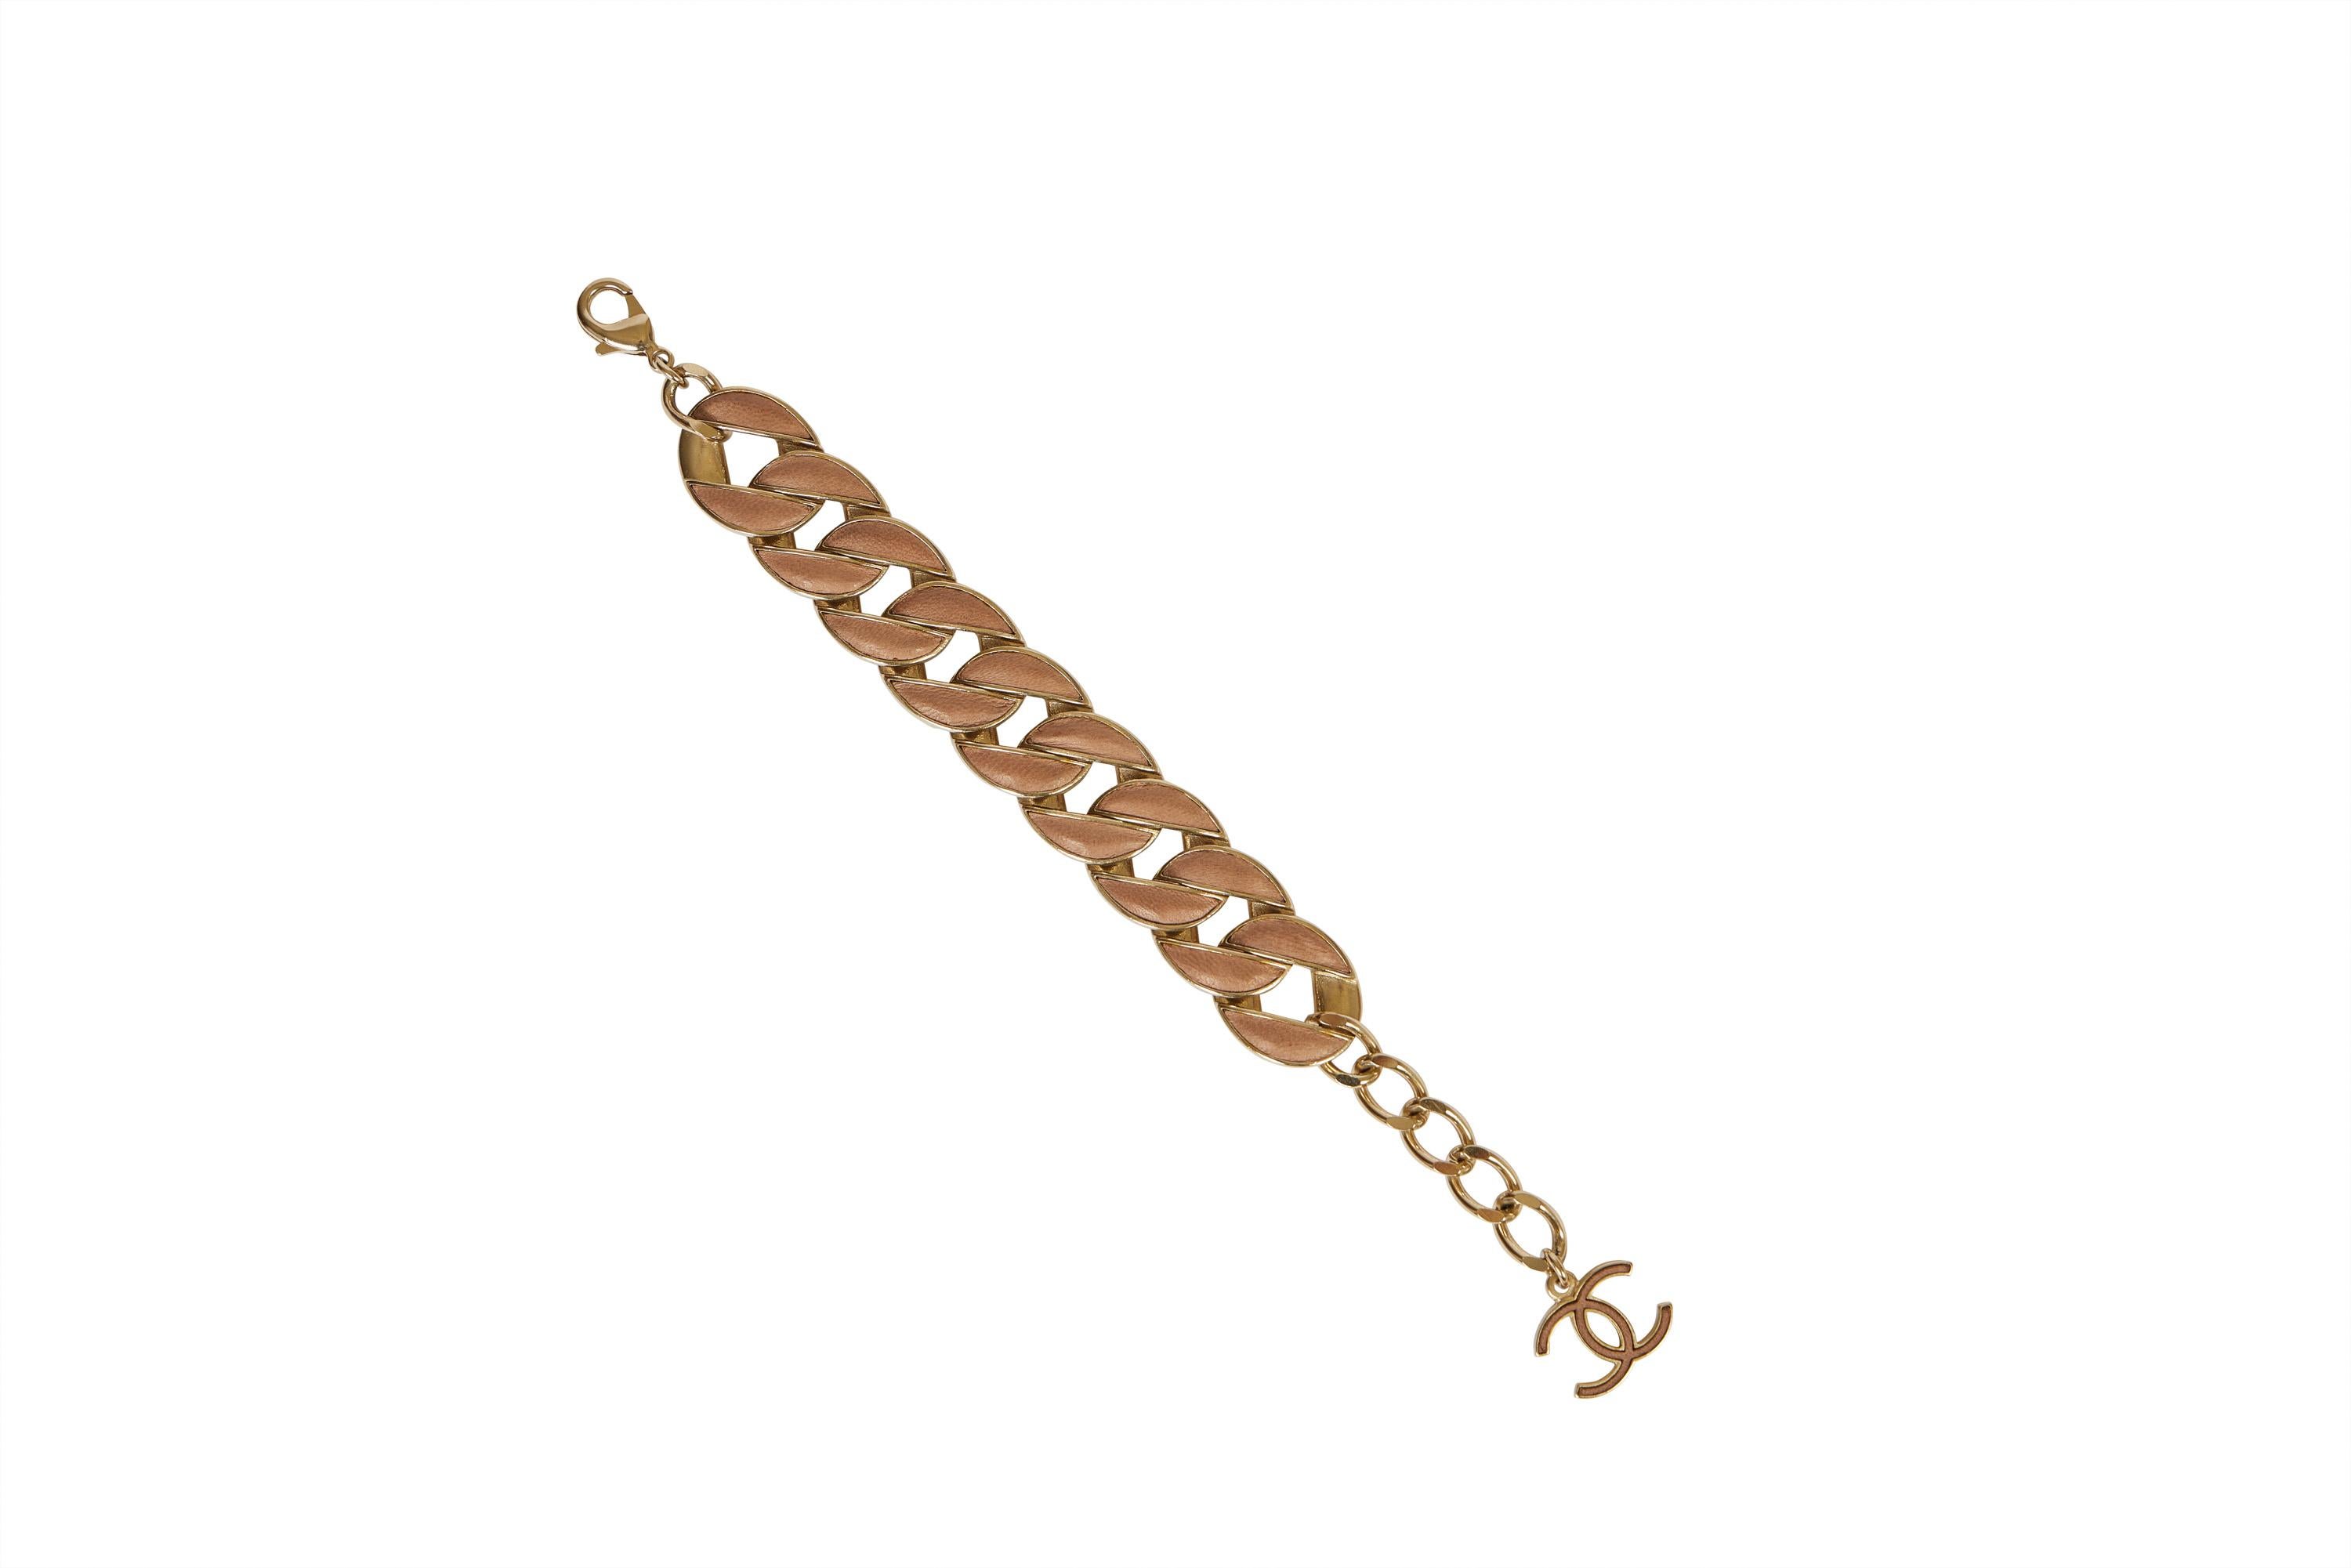 Chanel Beige Leather Chain Bracelet In Excellent Condition For Sale In West Hollywood, CA